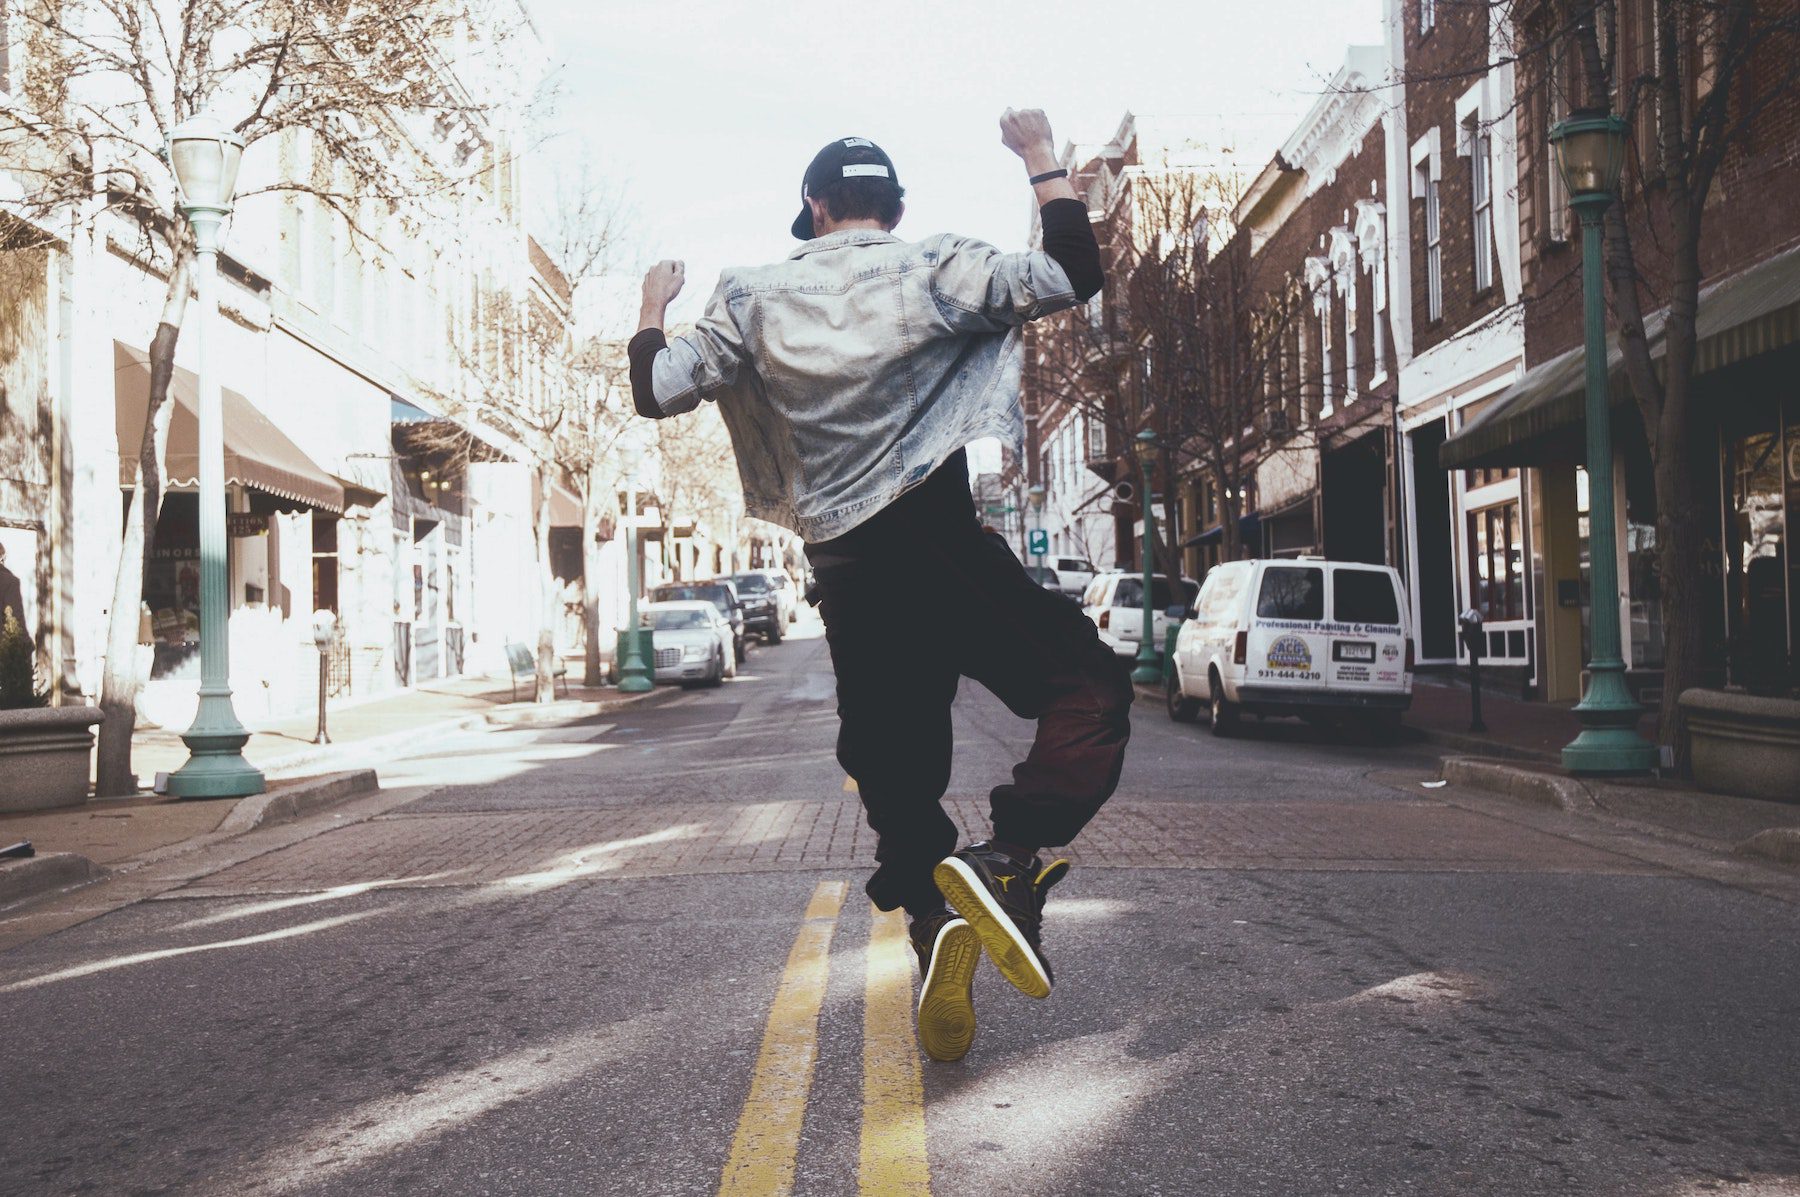 A man wearing a jean jacket and dark pants dancing in the middle of the street by clicking his heels together and arms raiseed